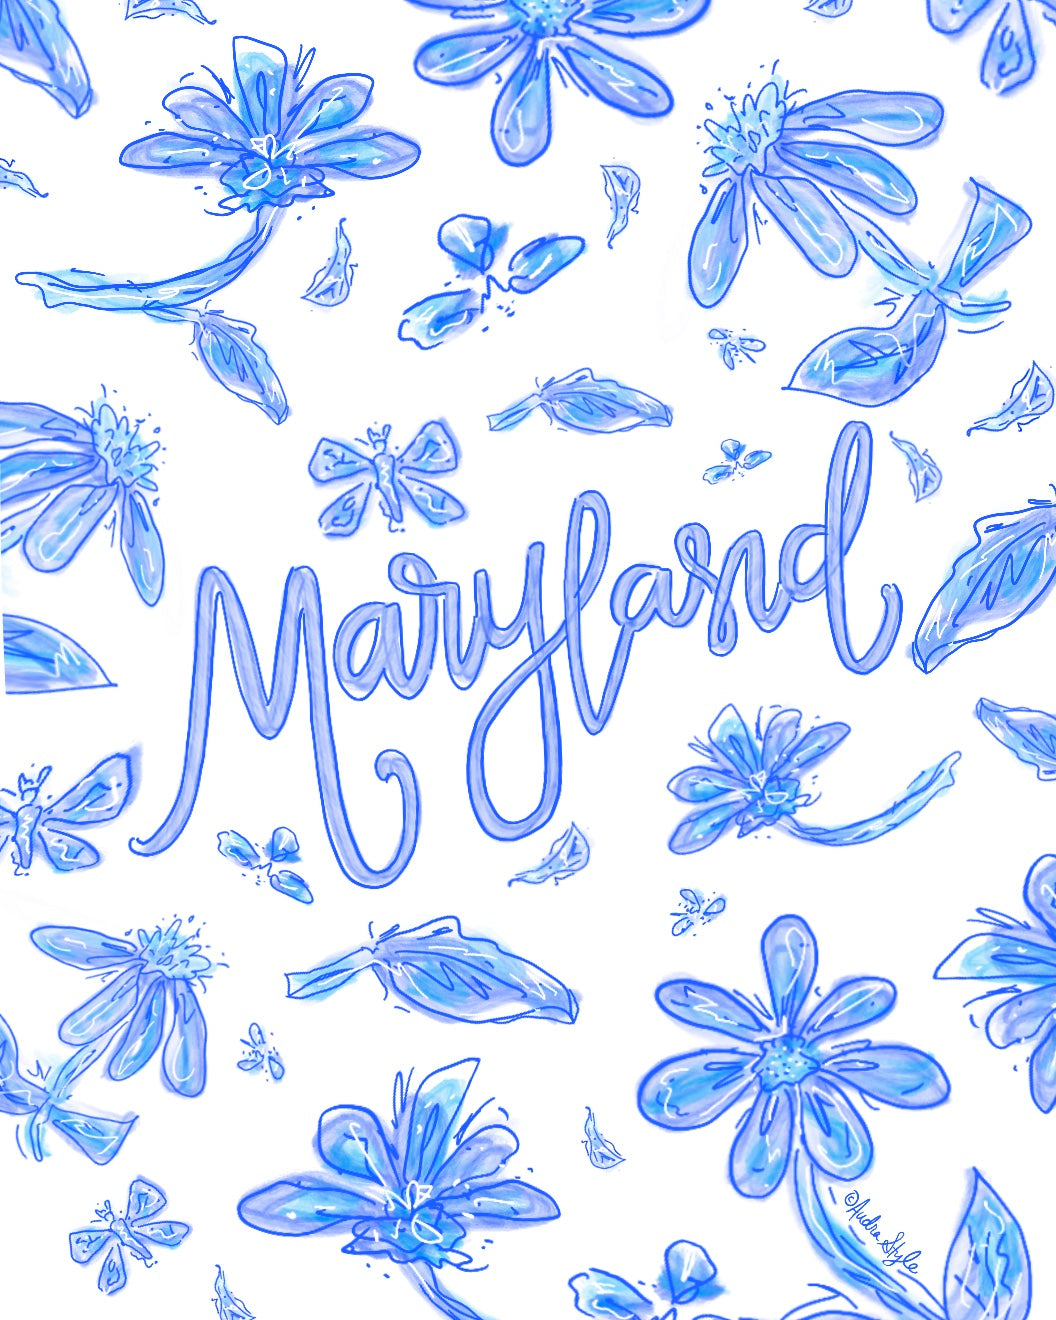 Blue and White Maryland Floral Reproduction Print